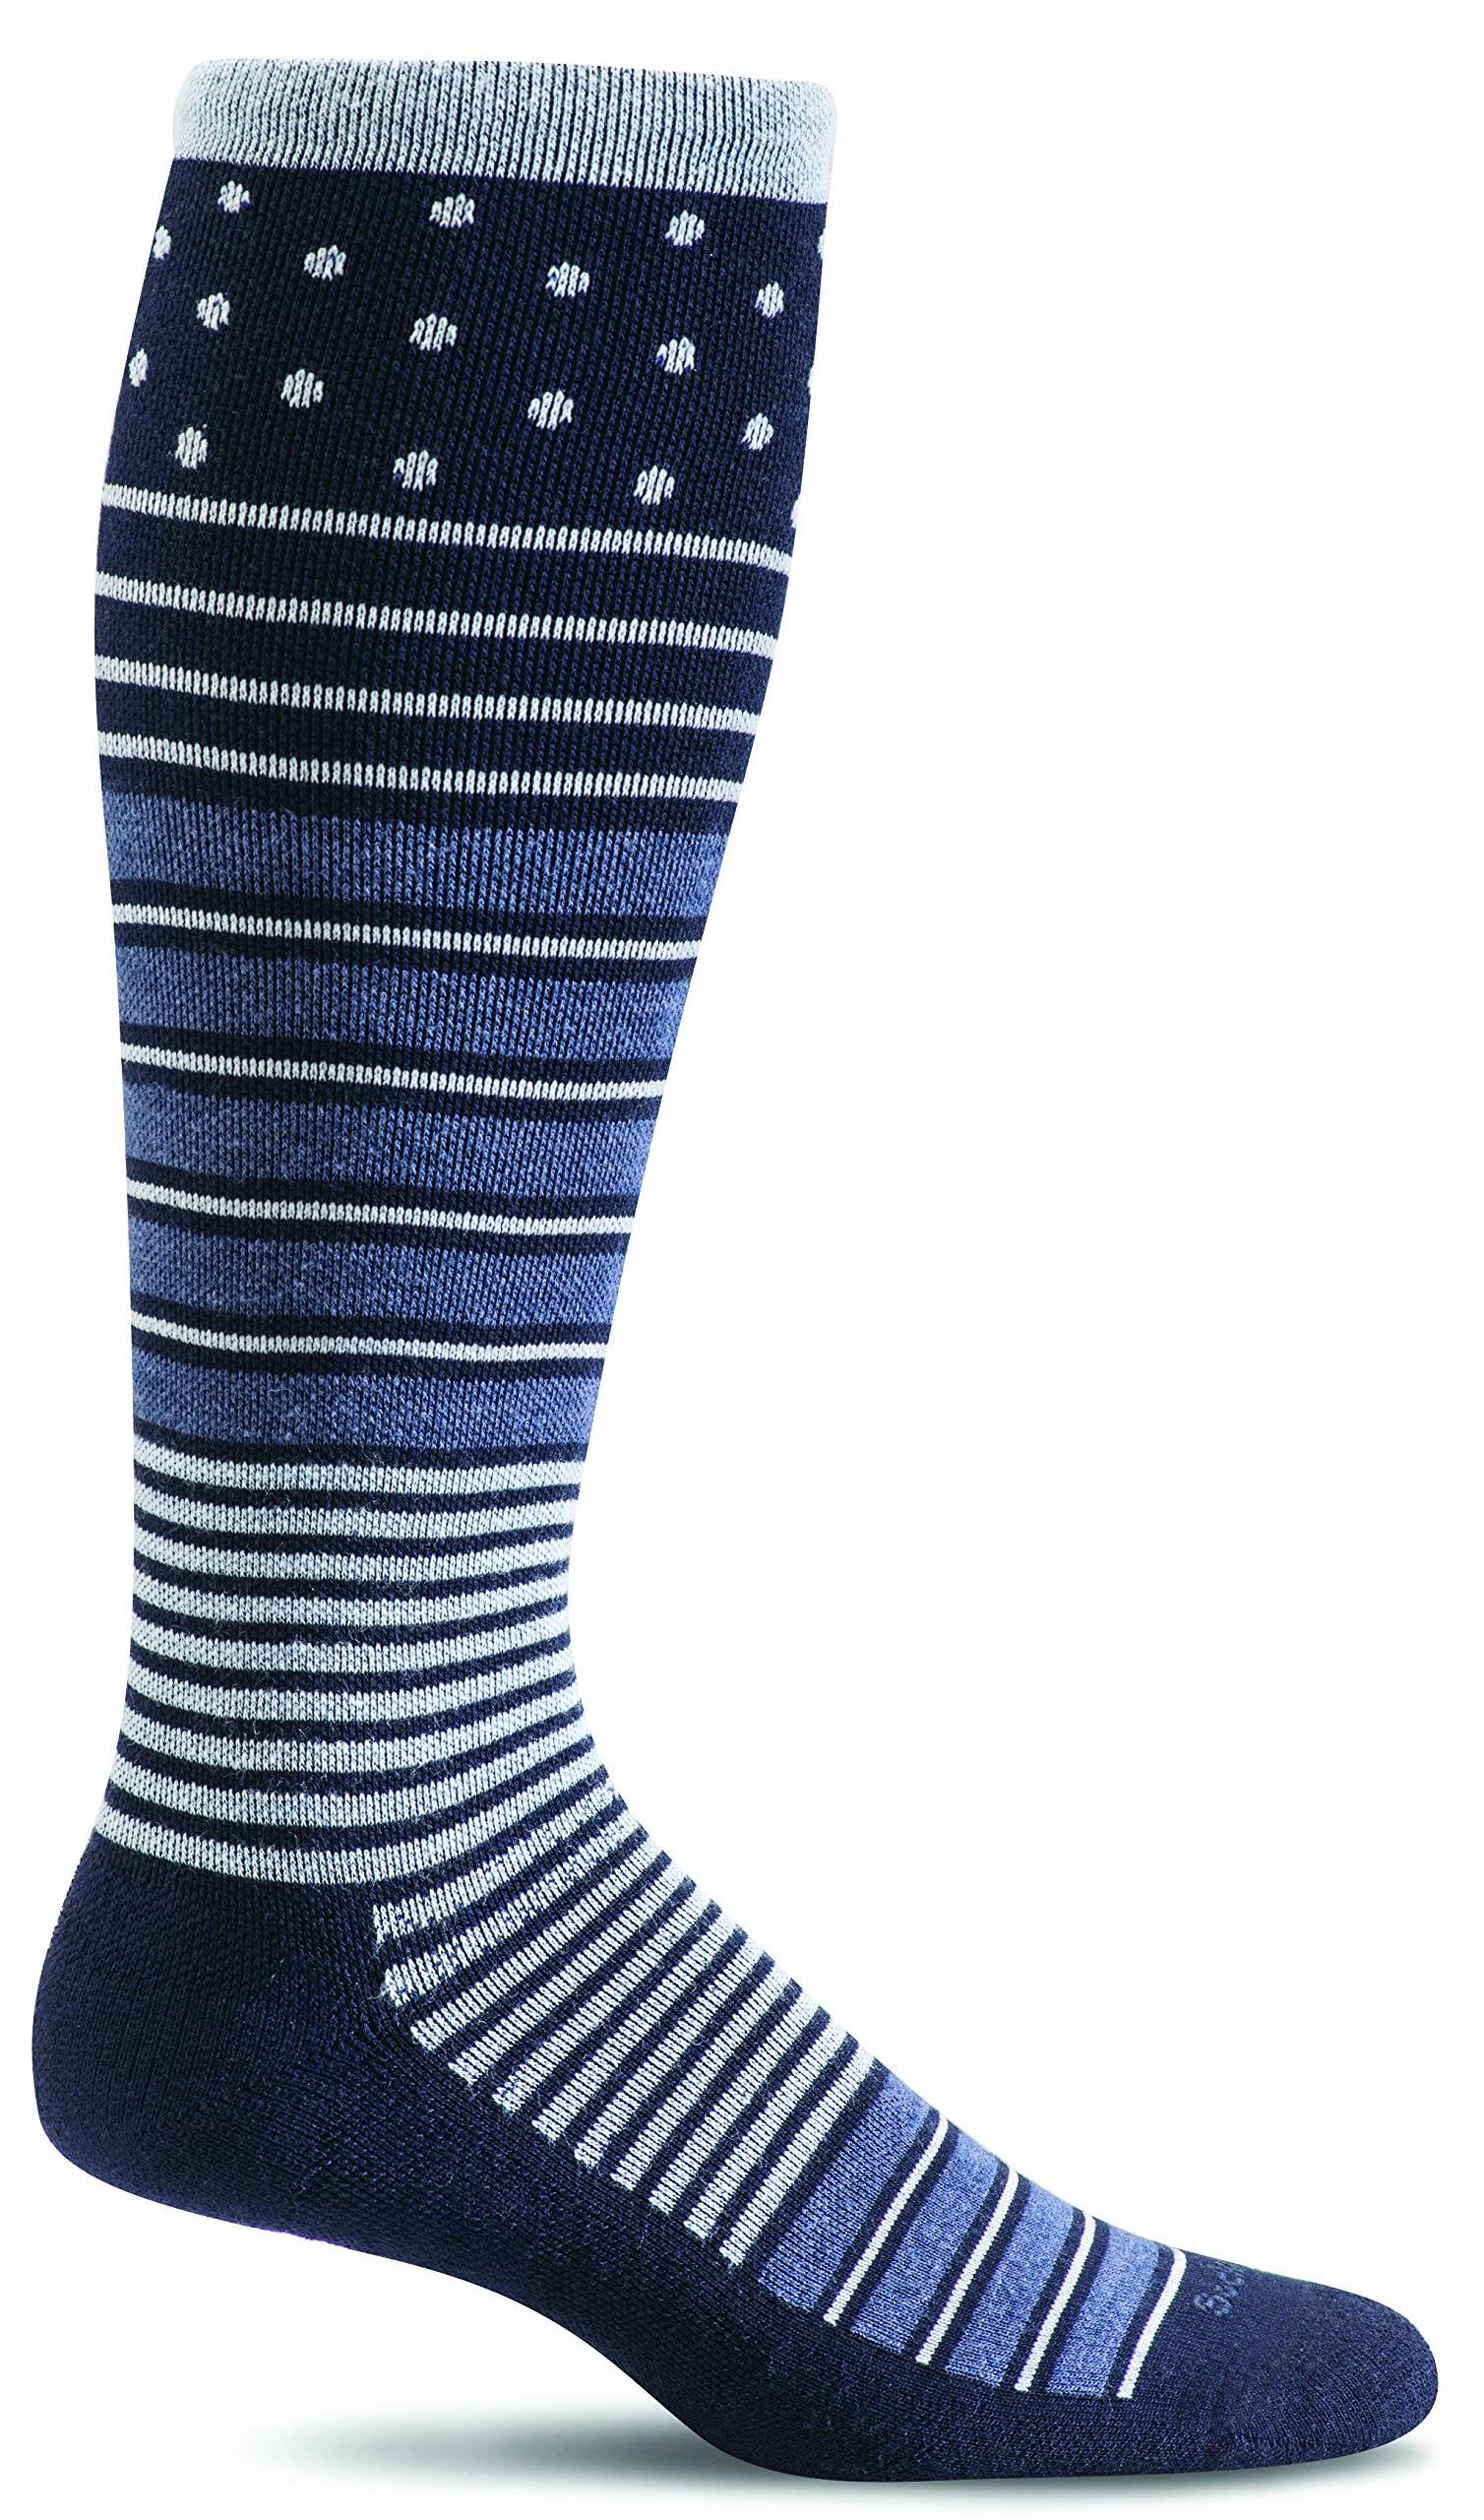 Sockwell Women's Twister Firm Compression Socks, Navy, Small